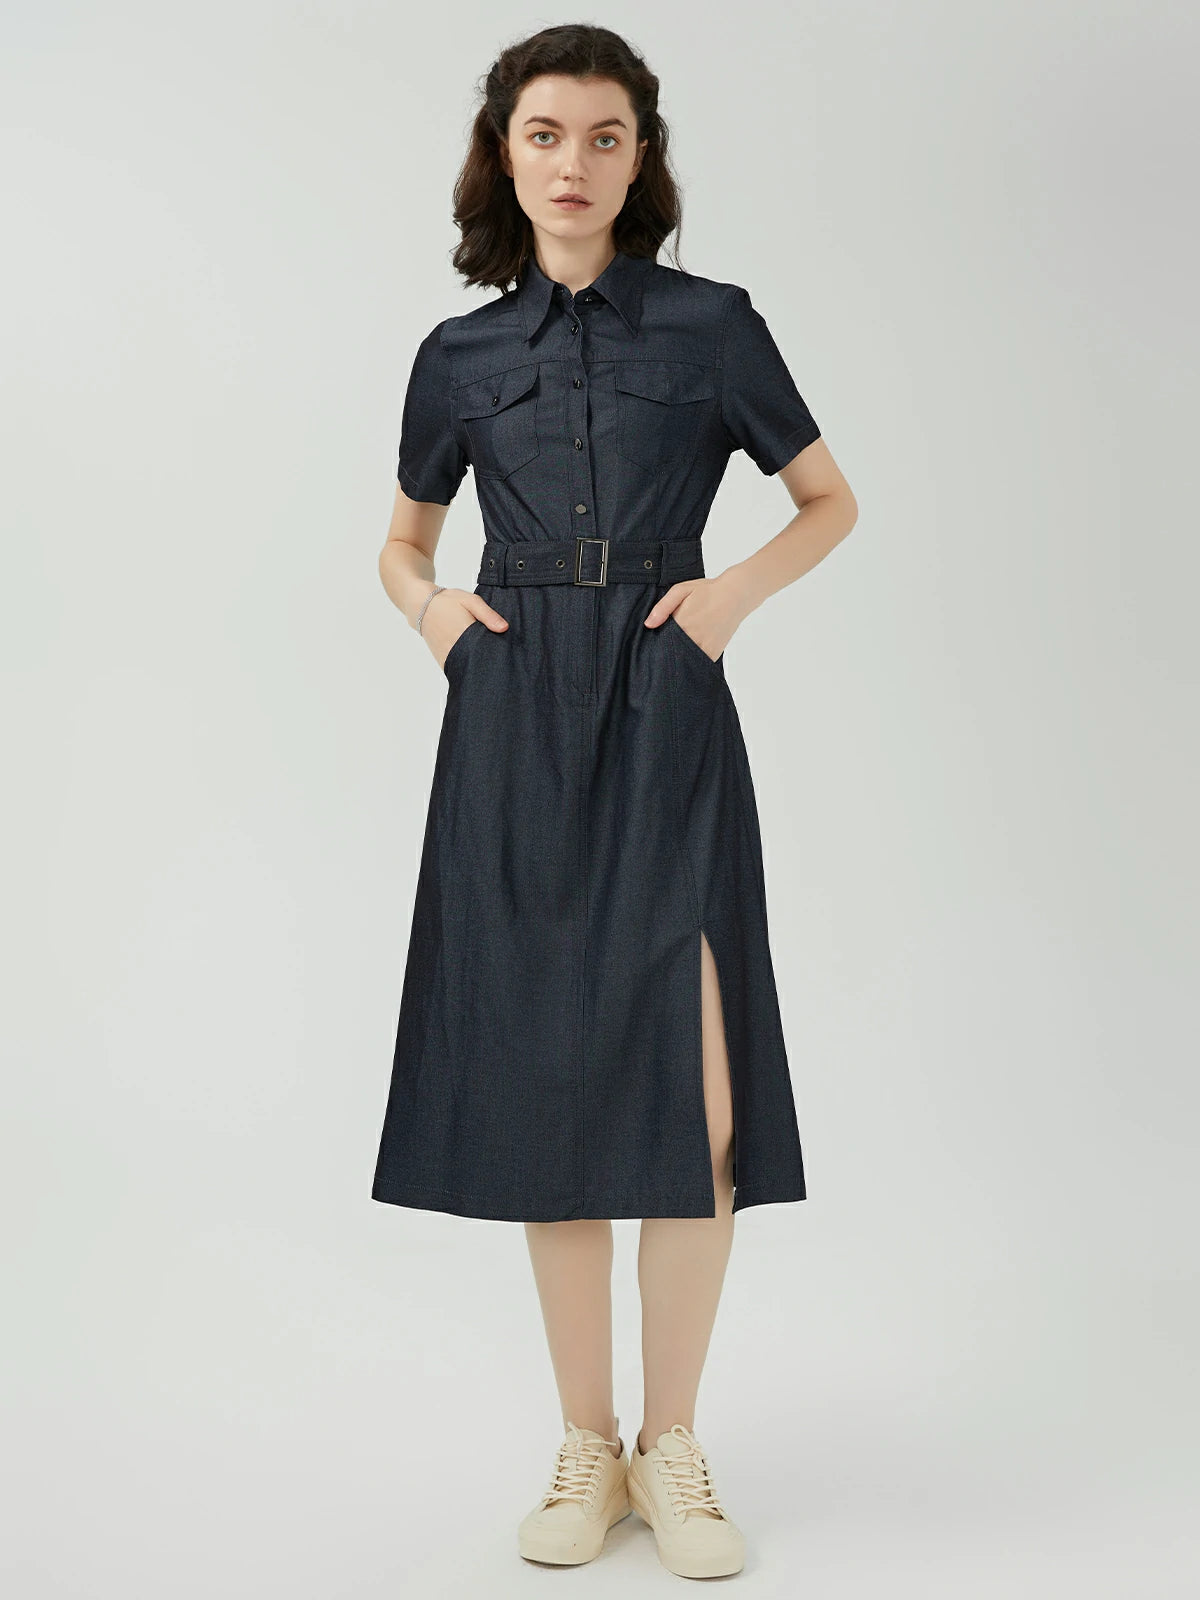 Collared Denim Dress with Stylish Waist Belt: Combining classic and modern elements.